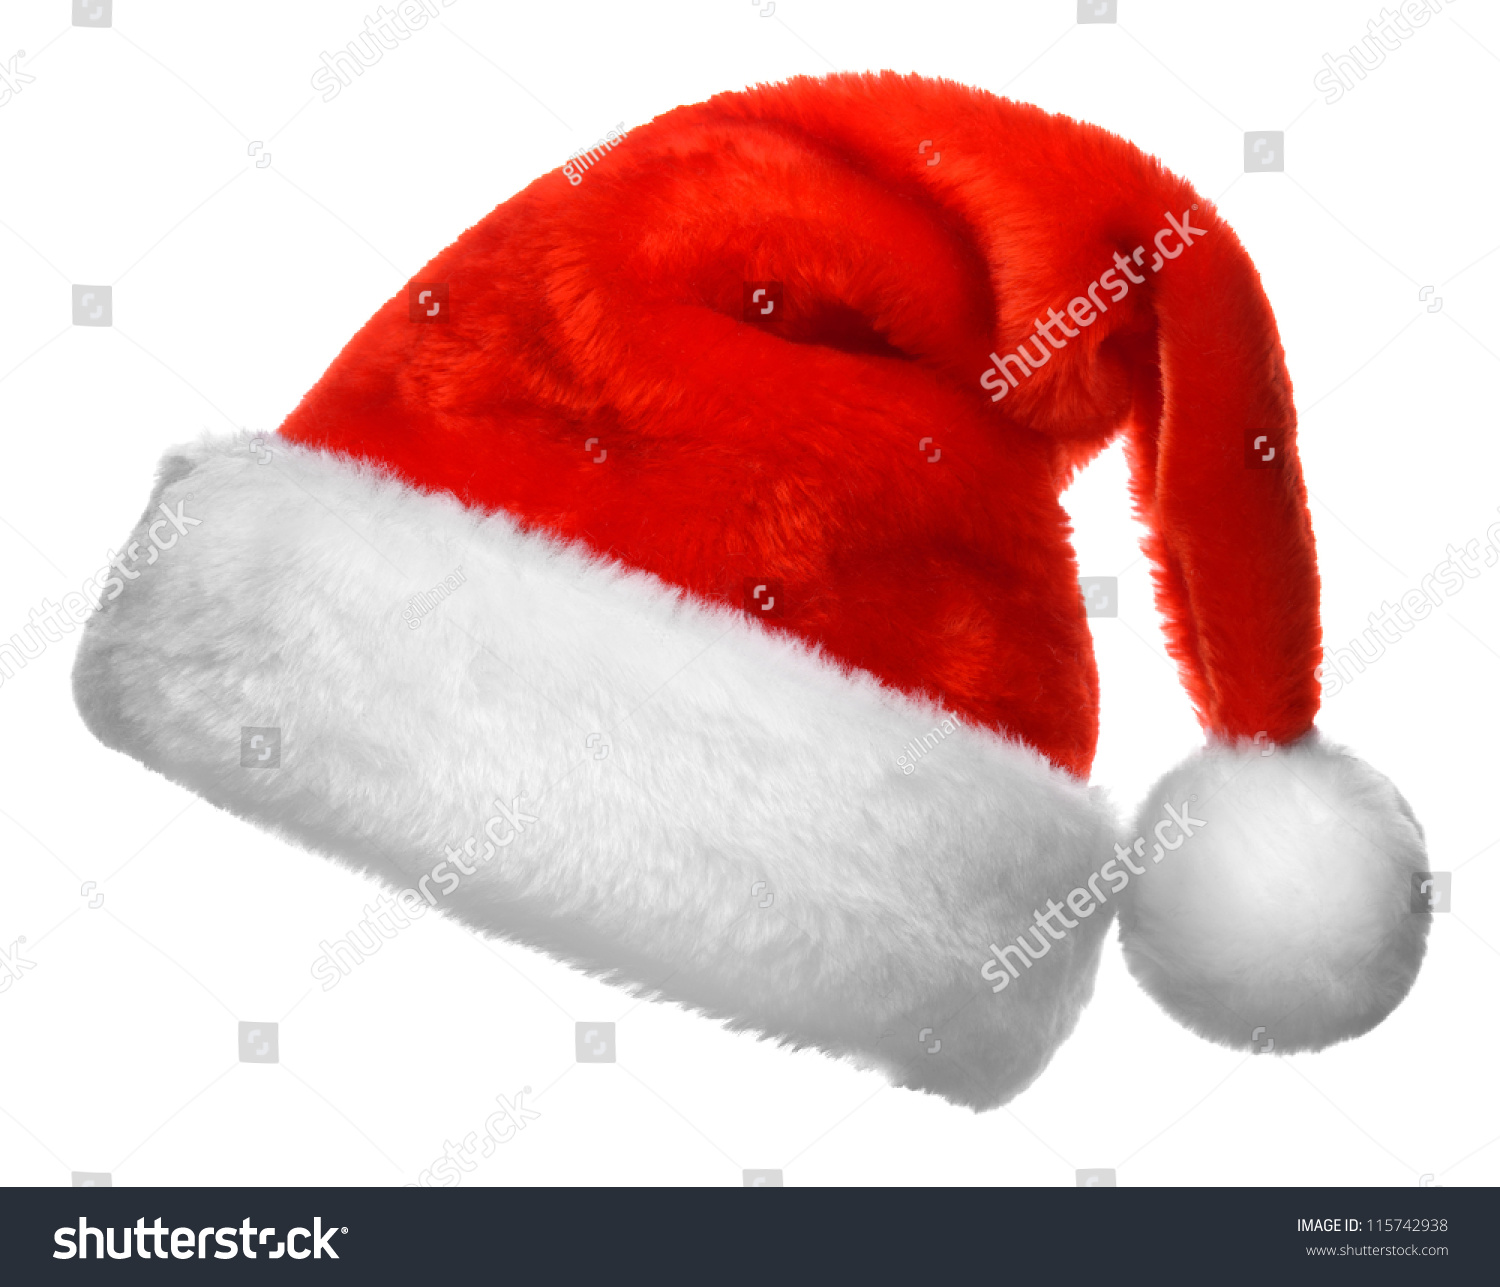 Single Santa Claus red hat isolated on white background #115742938